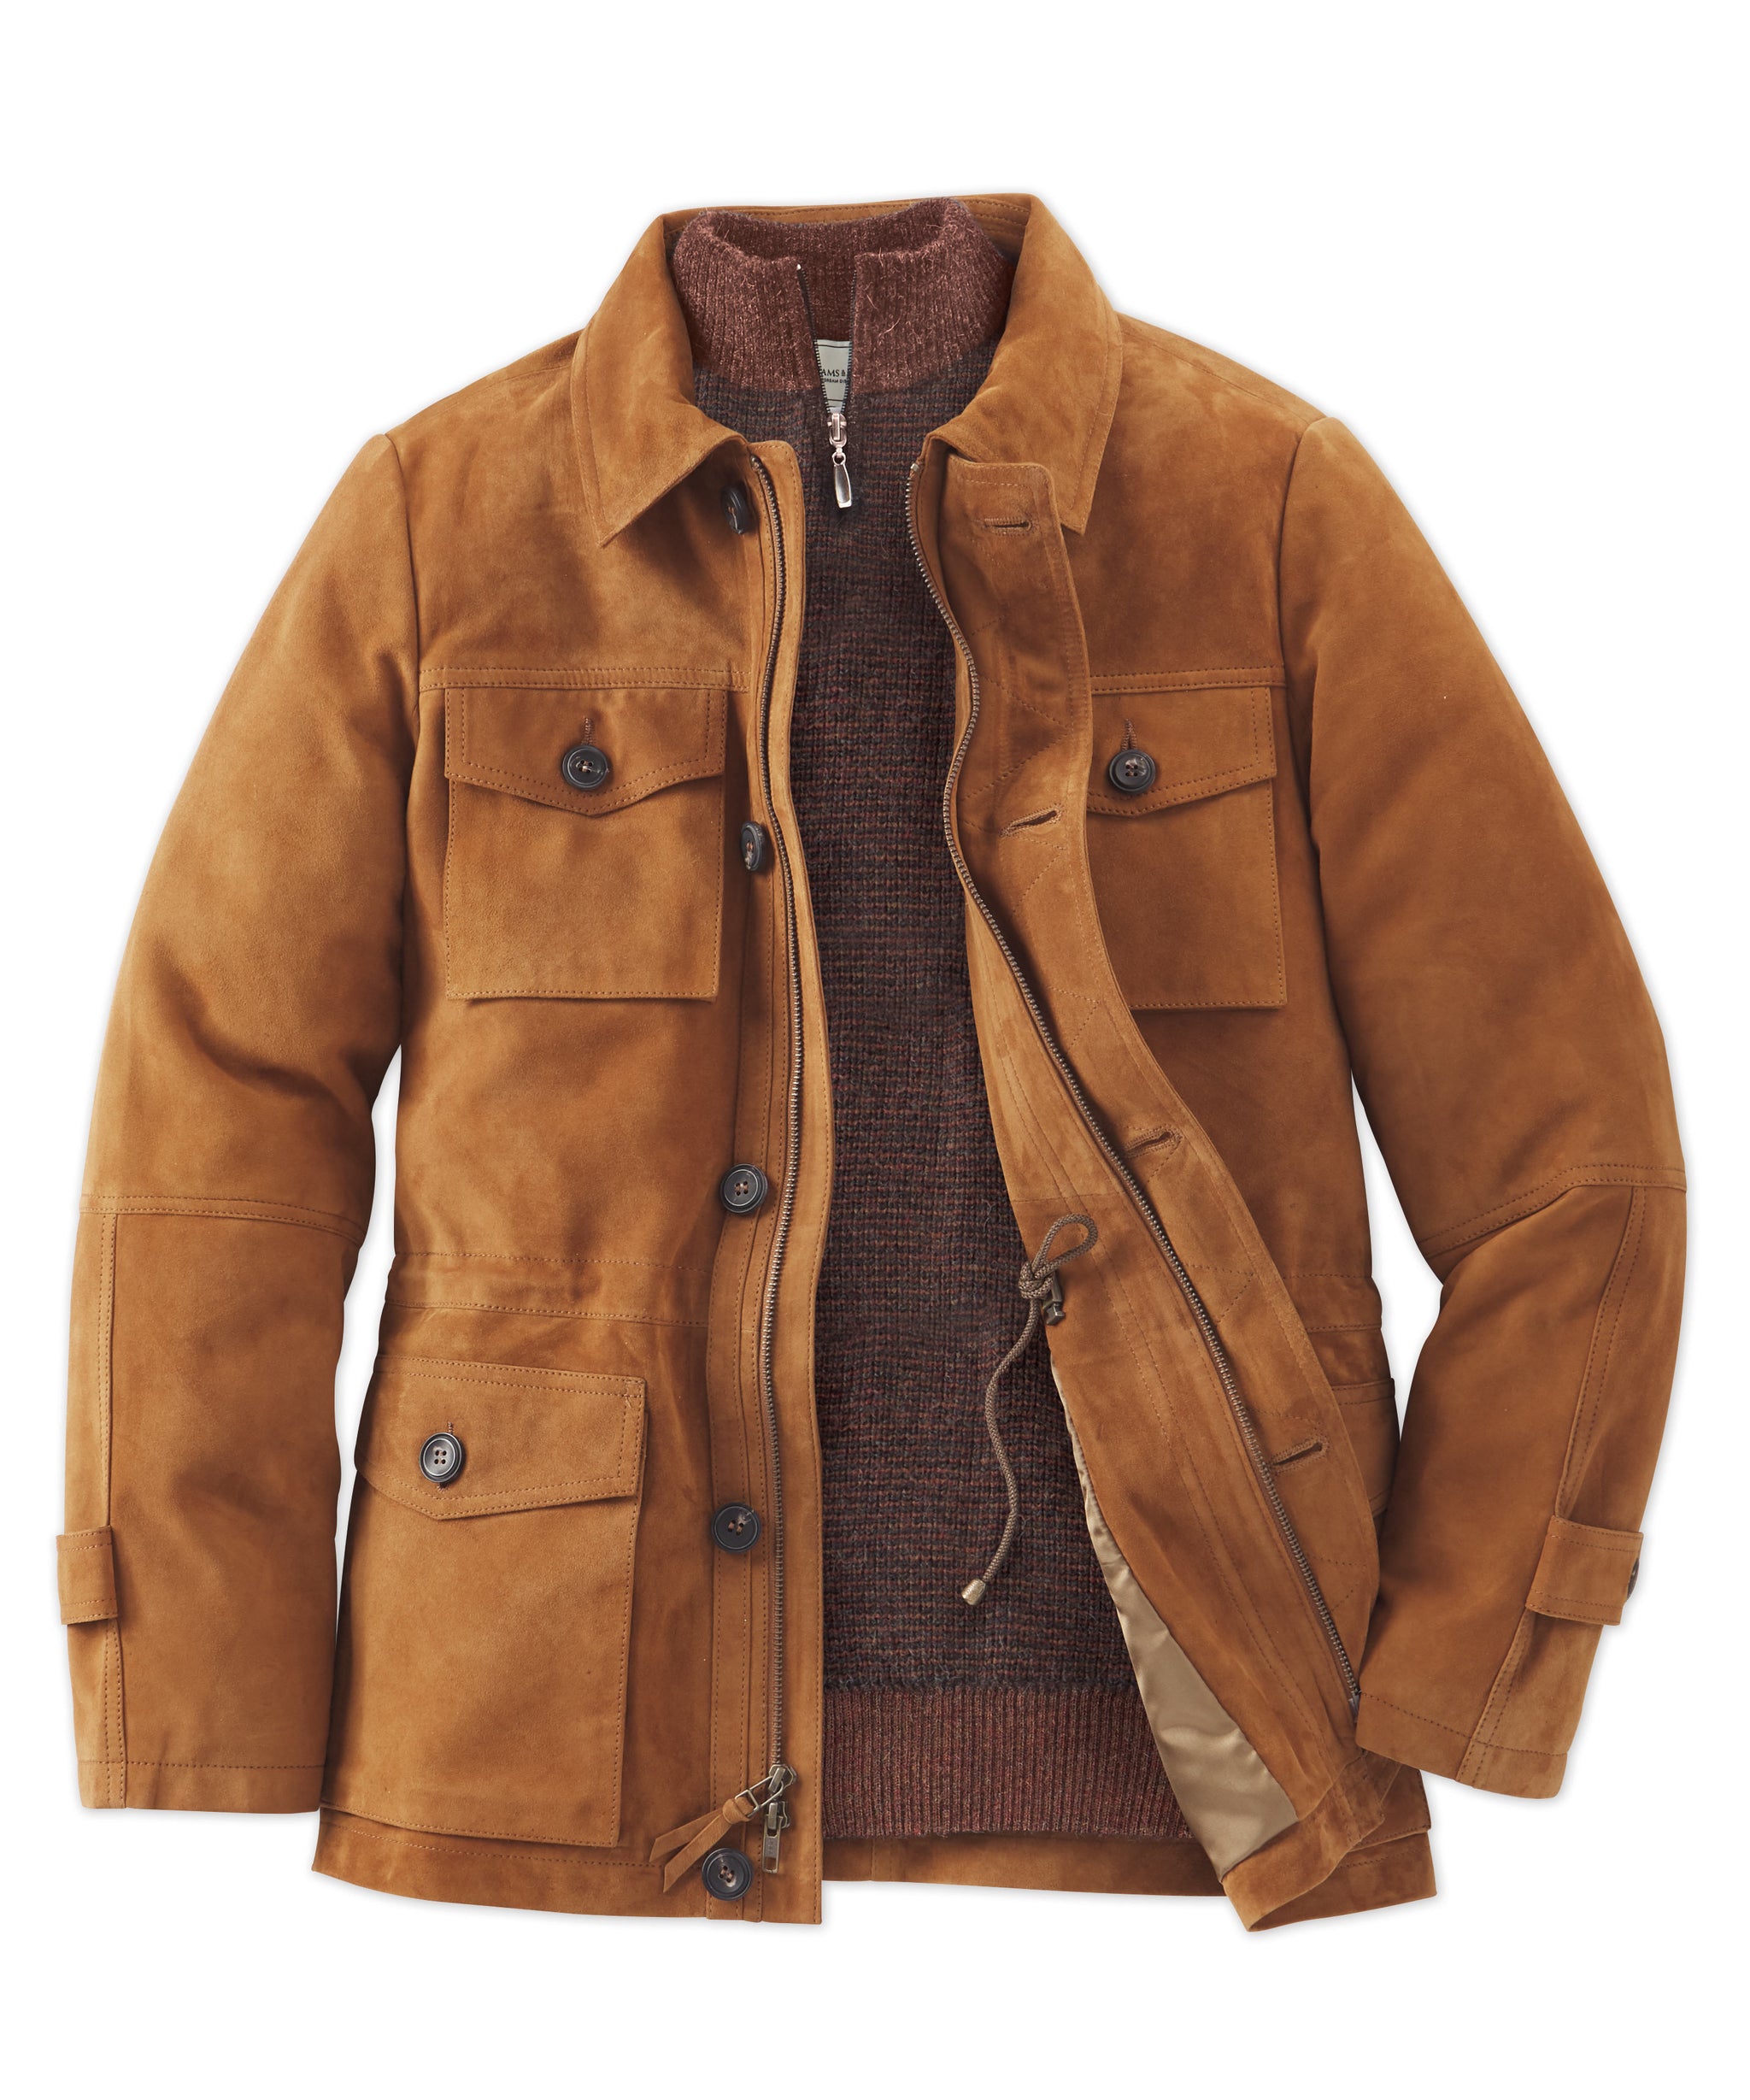 Goat Suede Field Jacket - Cocoa - Williams & Kent